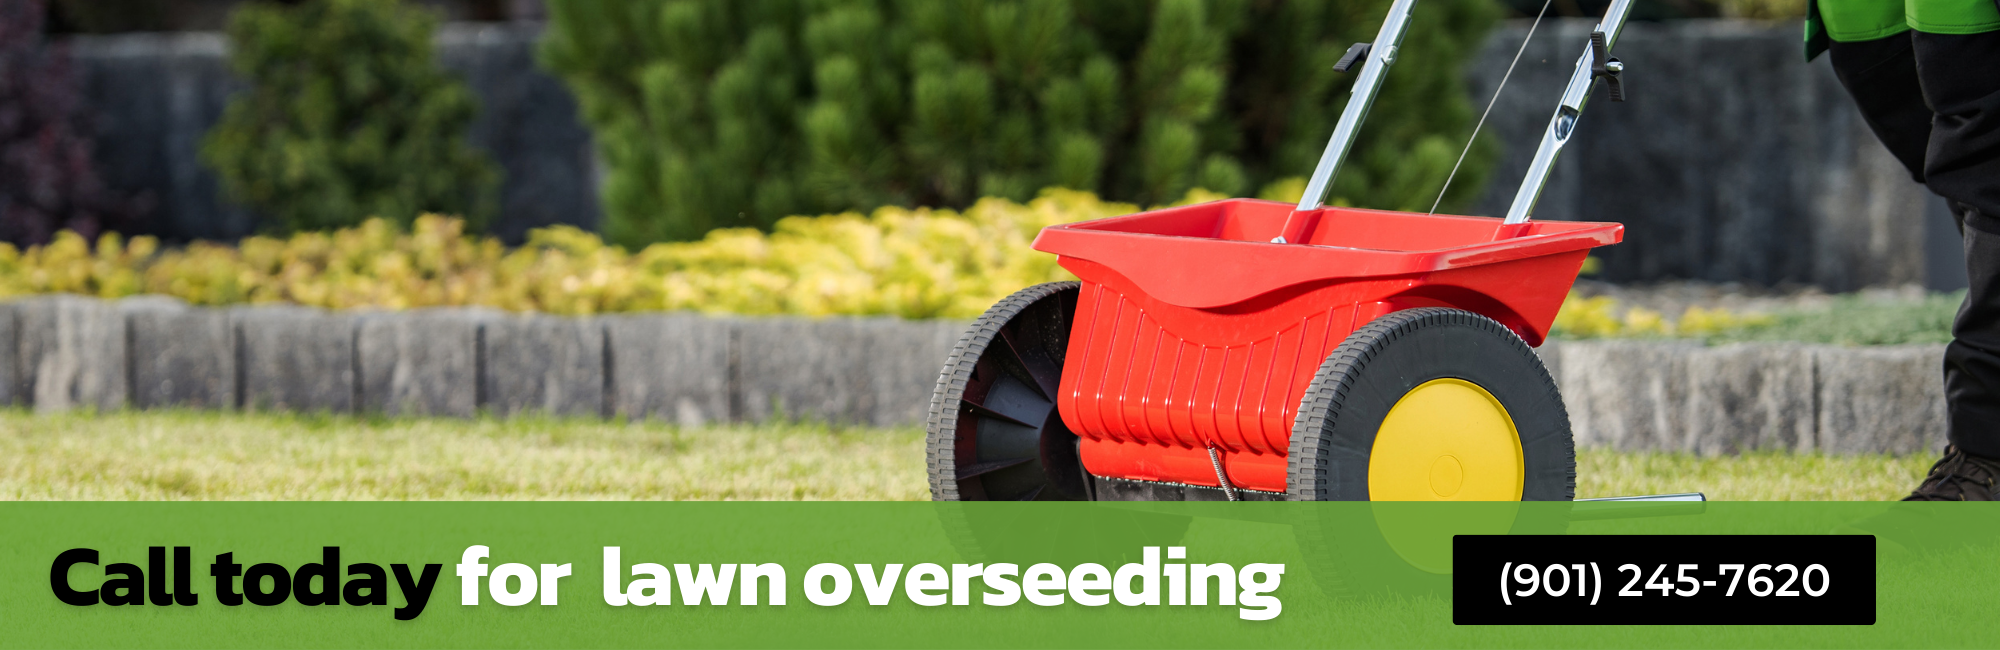 Call Today For Expert Lawn Overseeding 